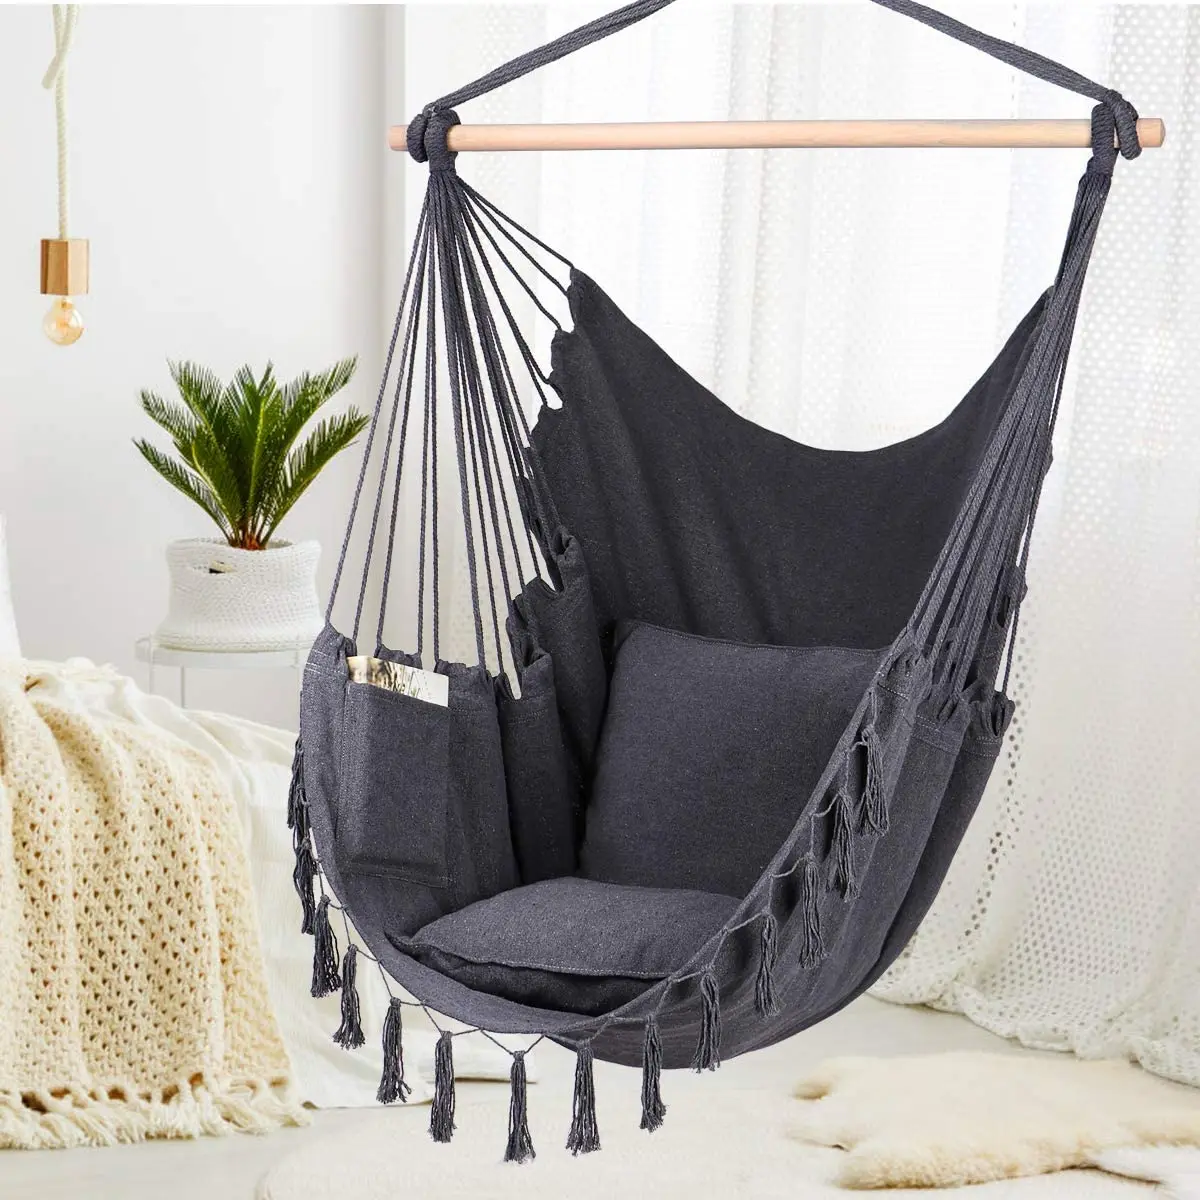 2 Pillow Child/Adult Hammock Hanging Rope Hammock Chair Swing Seat Hammock Chair Relax Hanging Swing Chair for Indoor